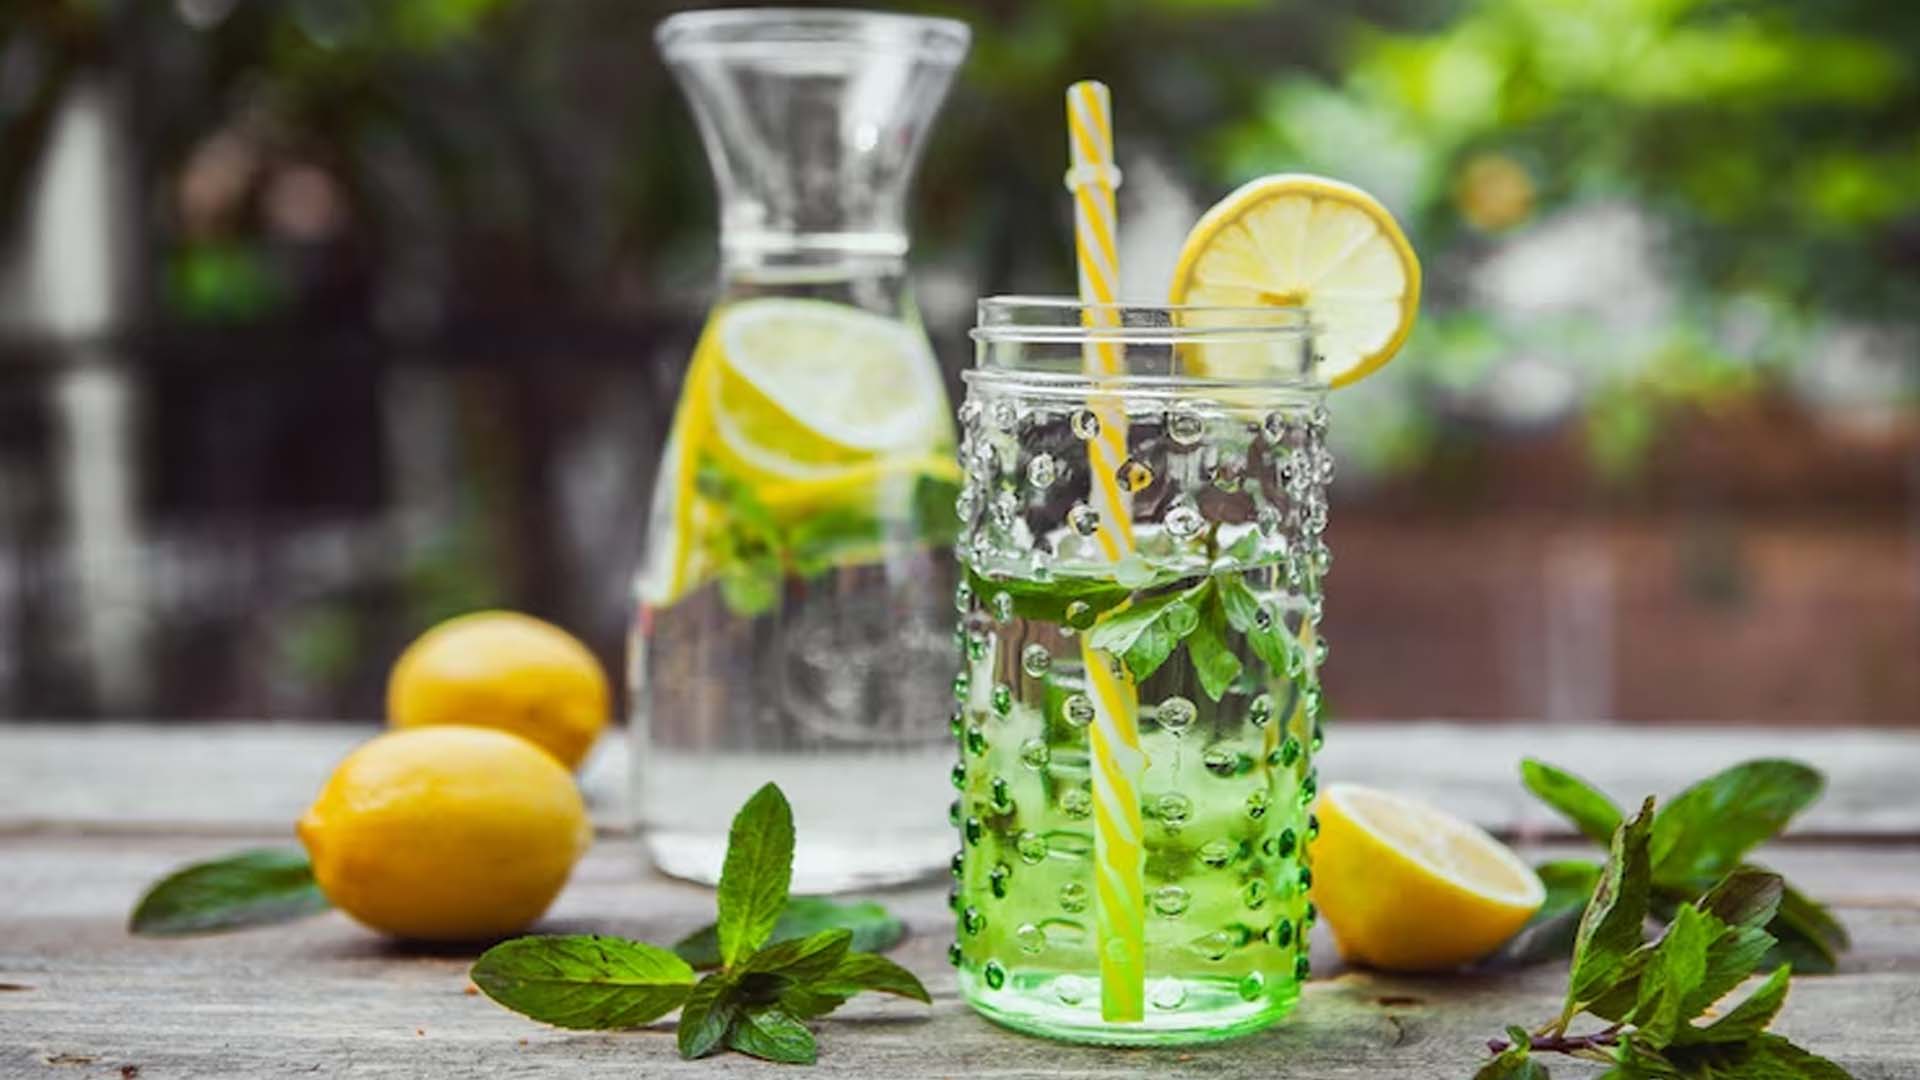 Can We Drink Mint Water Daily?